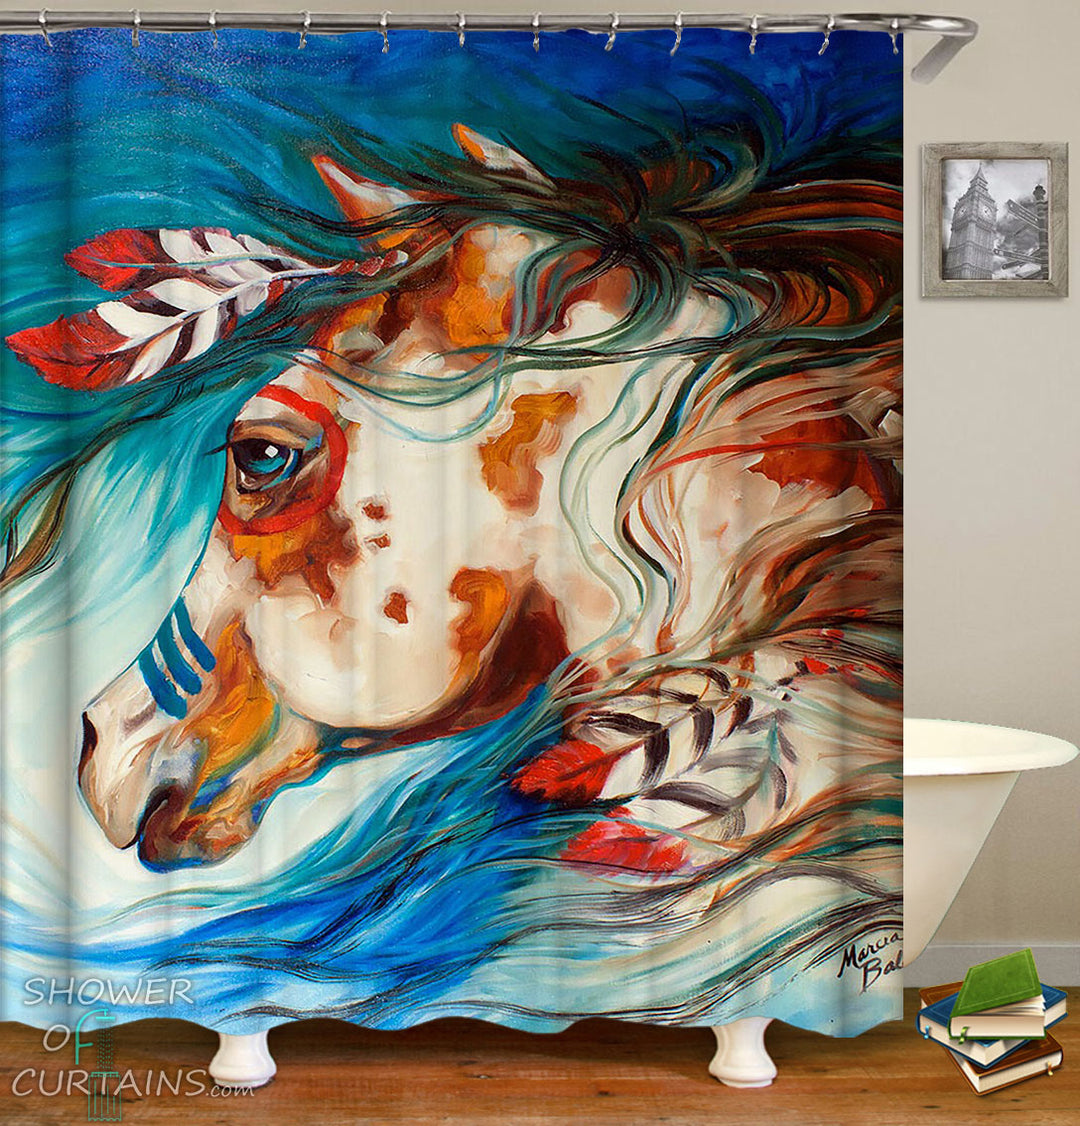 Native American Art Shower Curtain of Native Horse Painting